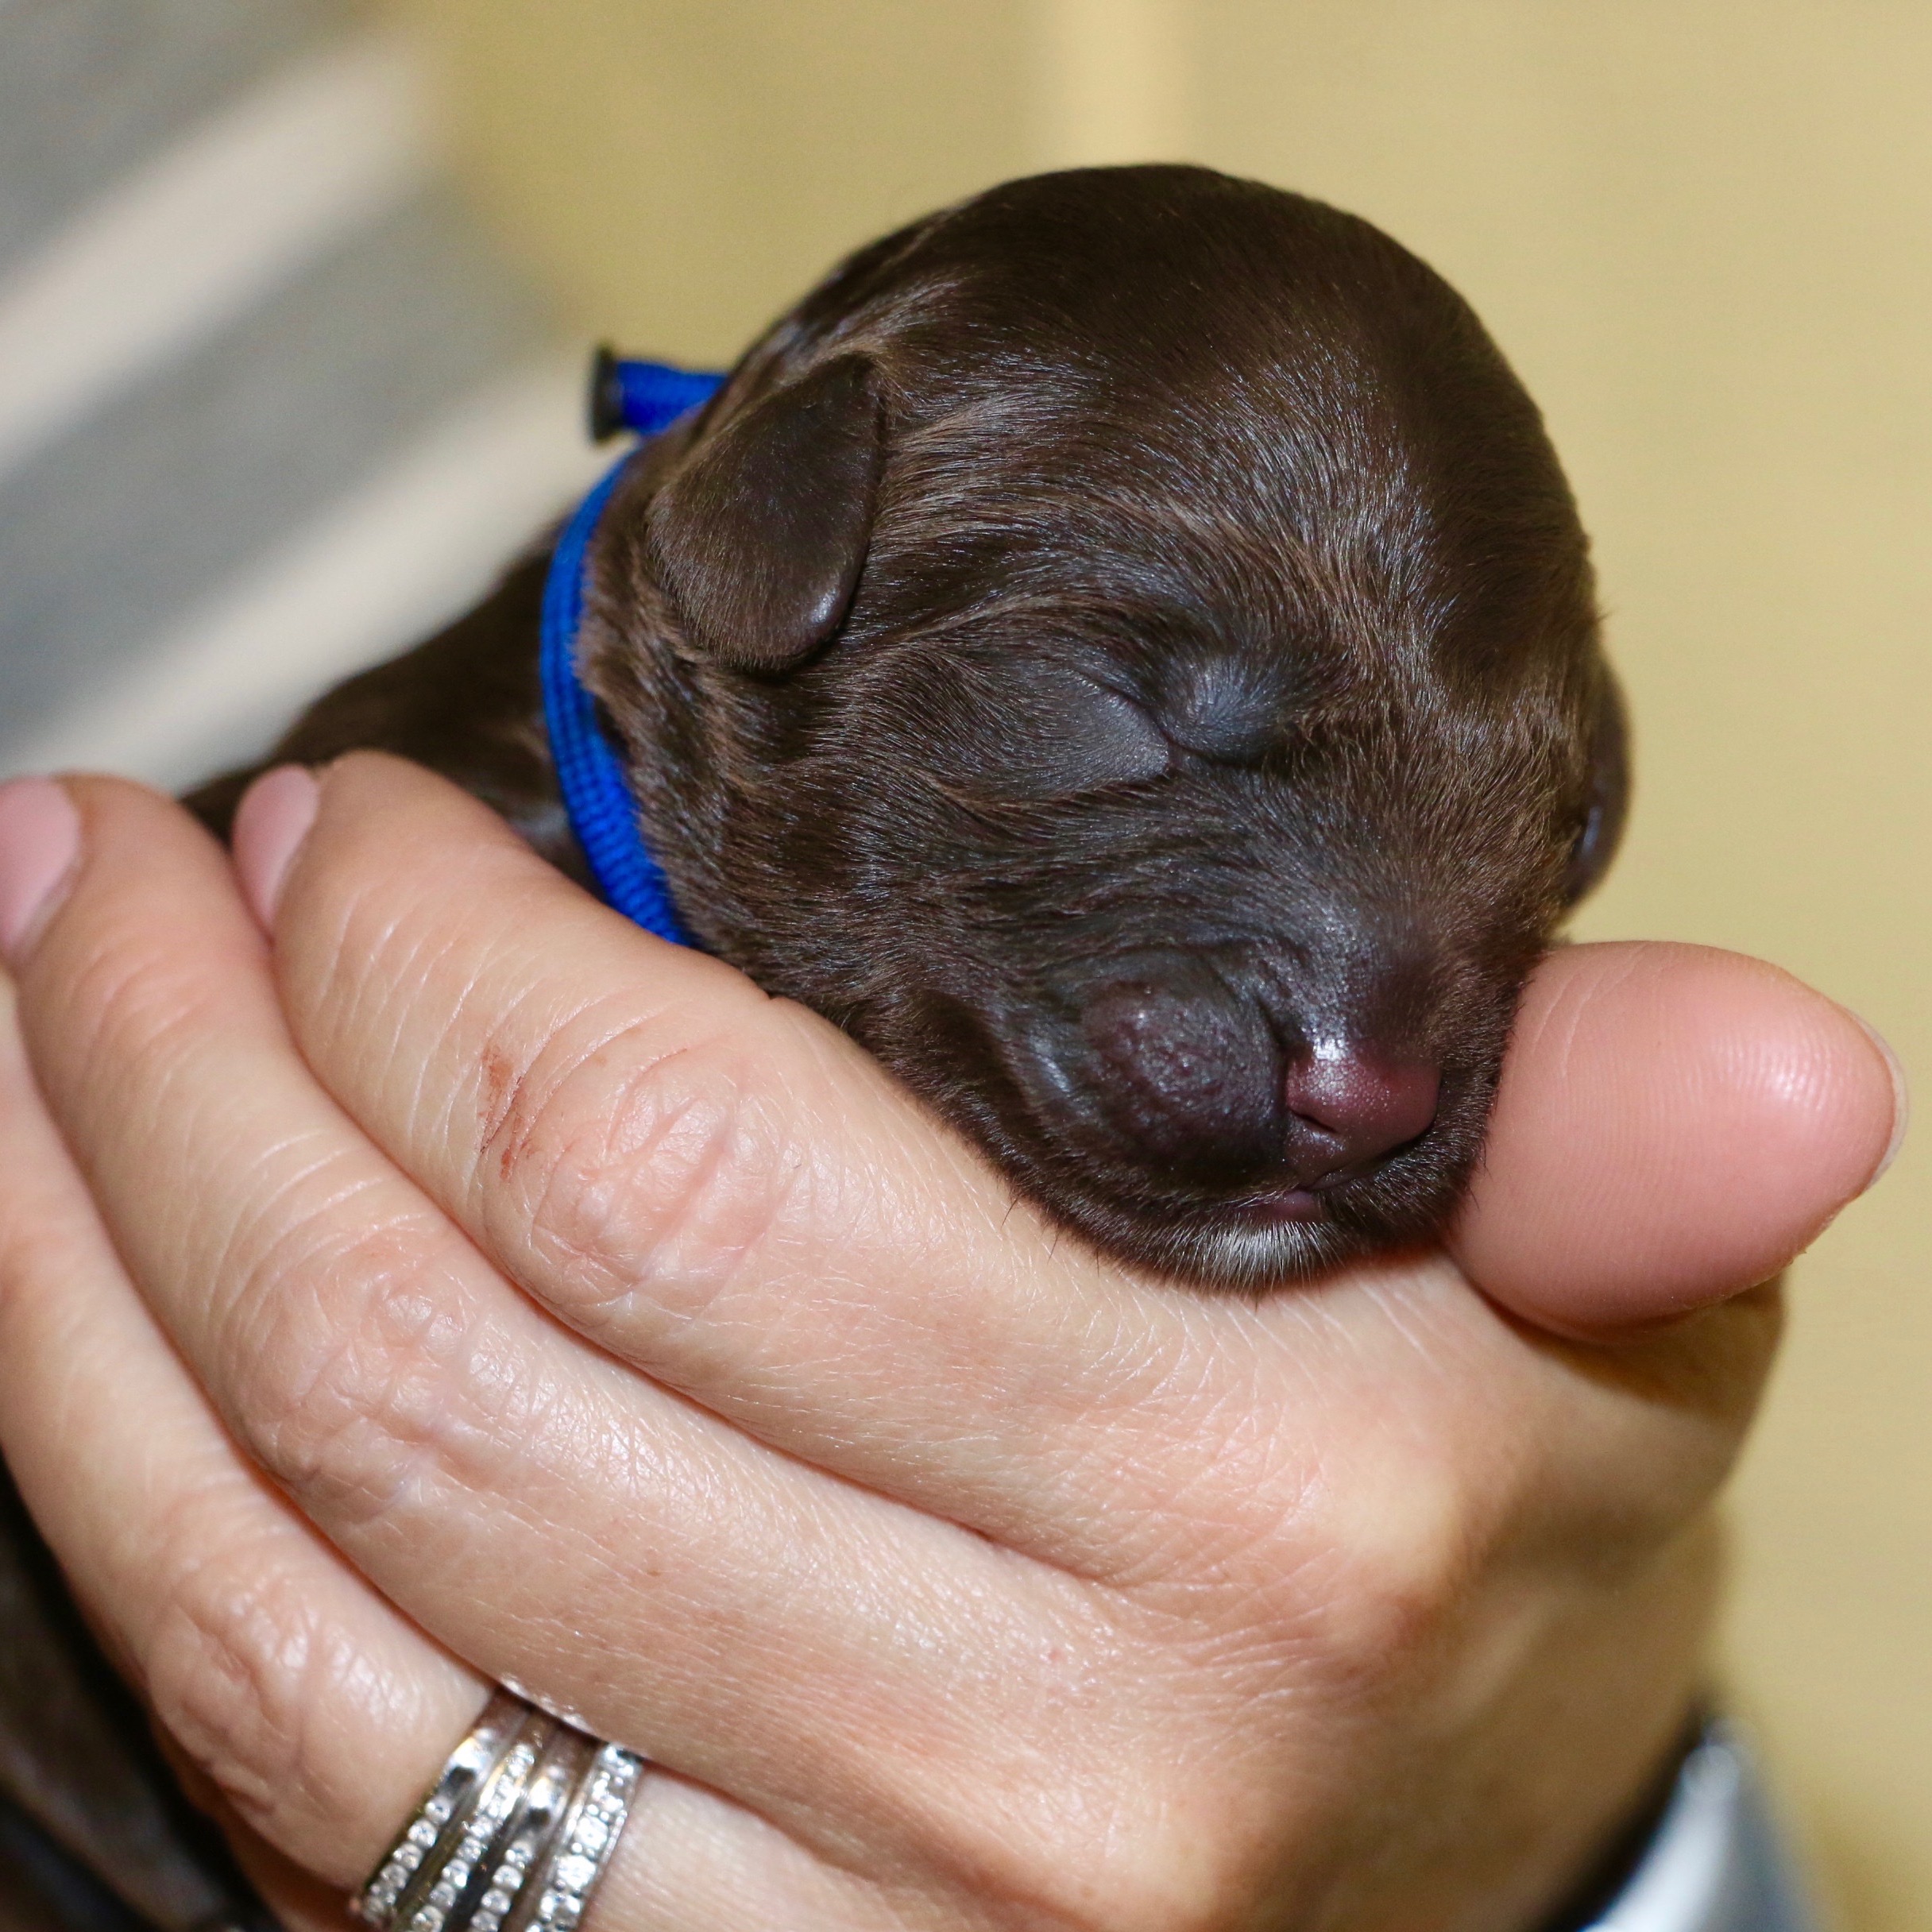 recently new born cafe colored australian labradoodle puppy being held in a hand